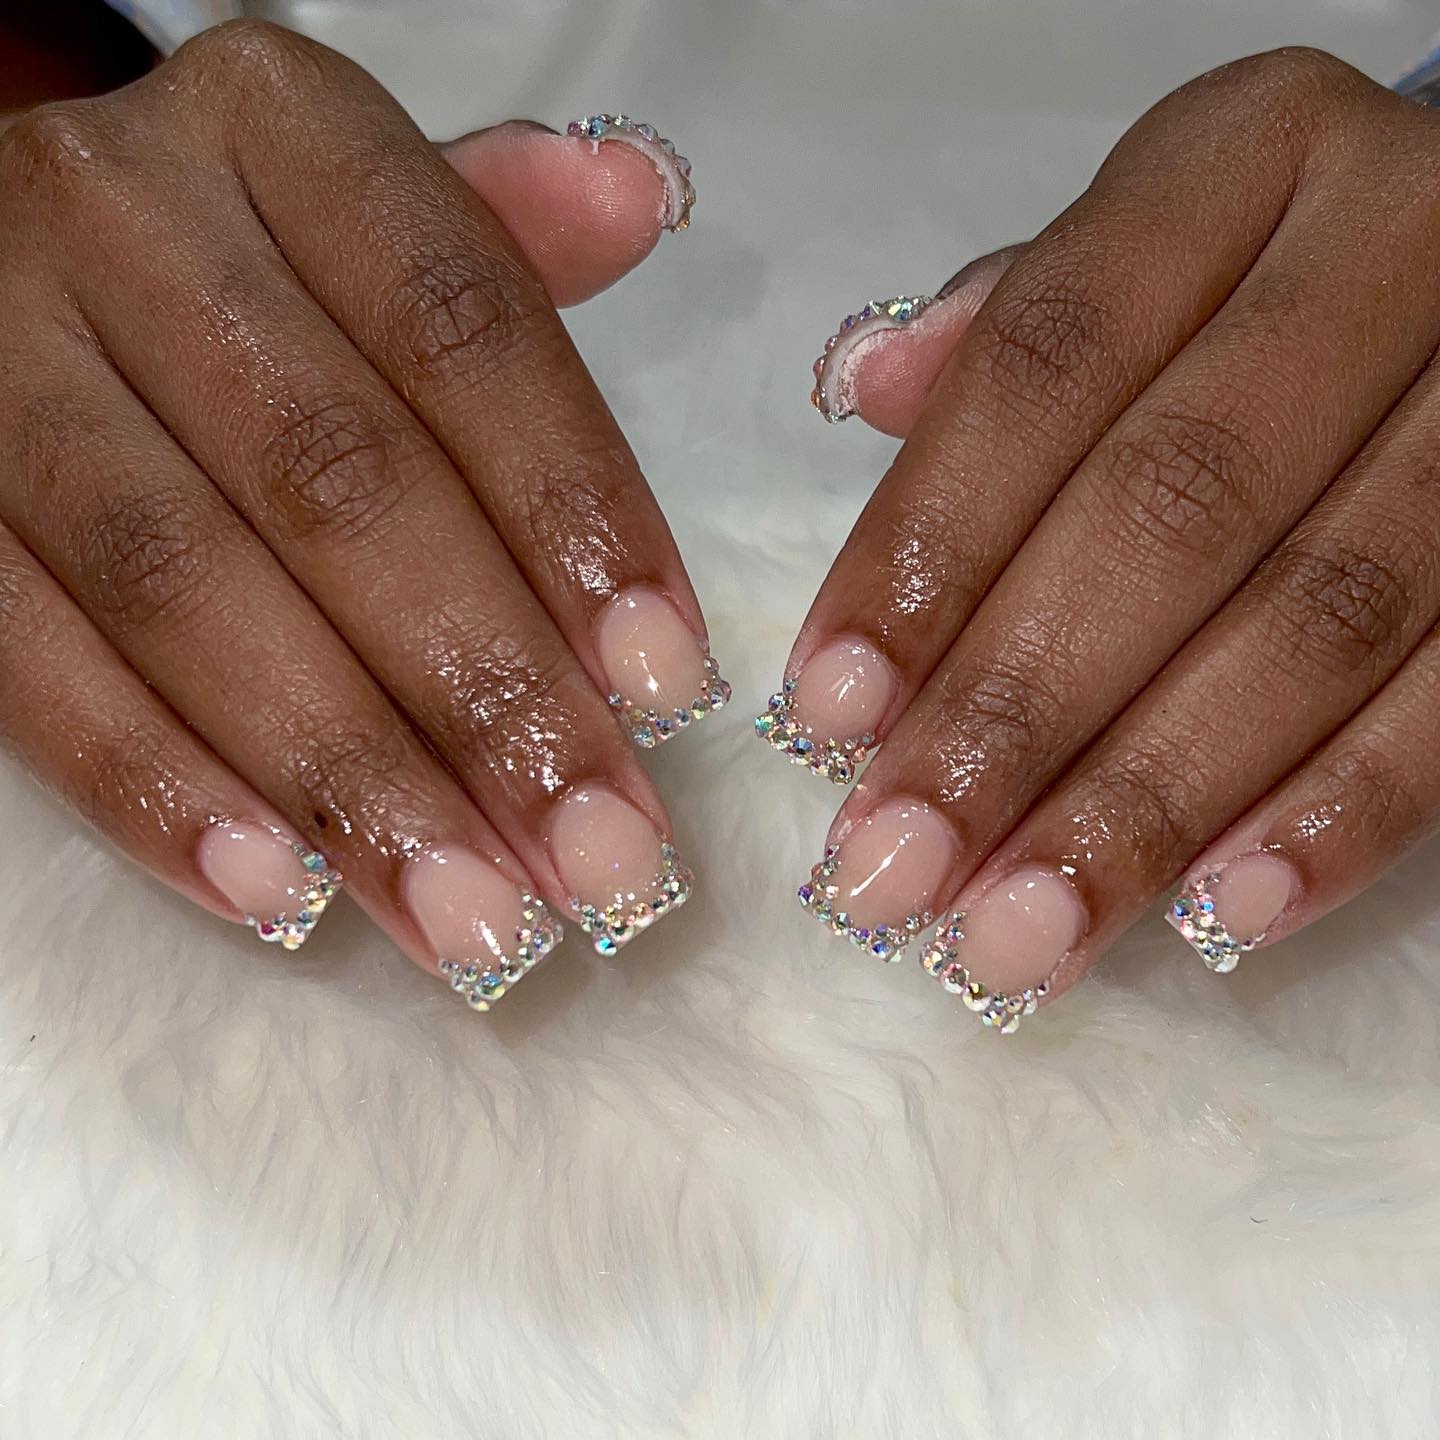 35+ Ideas For Gorgeous French Tip Nails With Diamonds